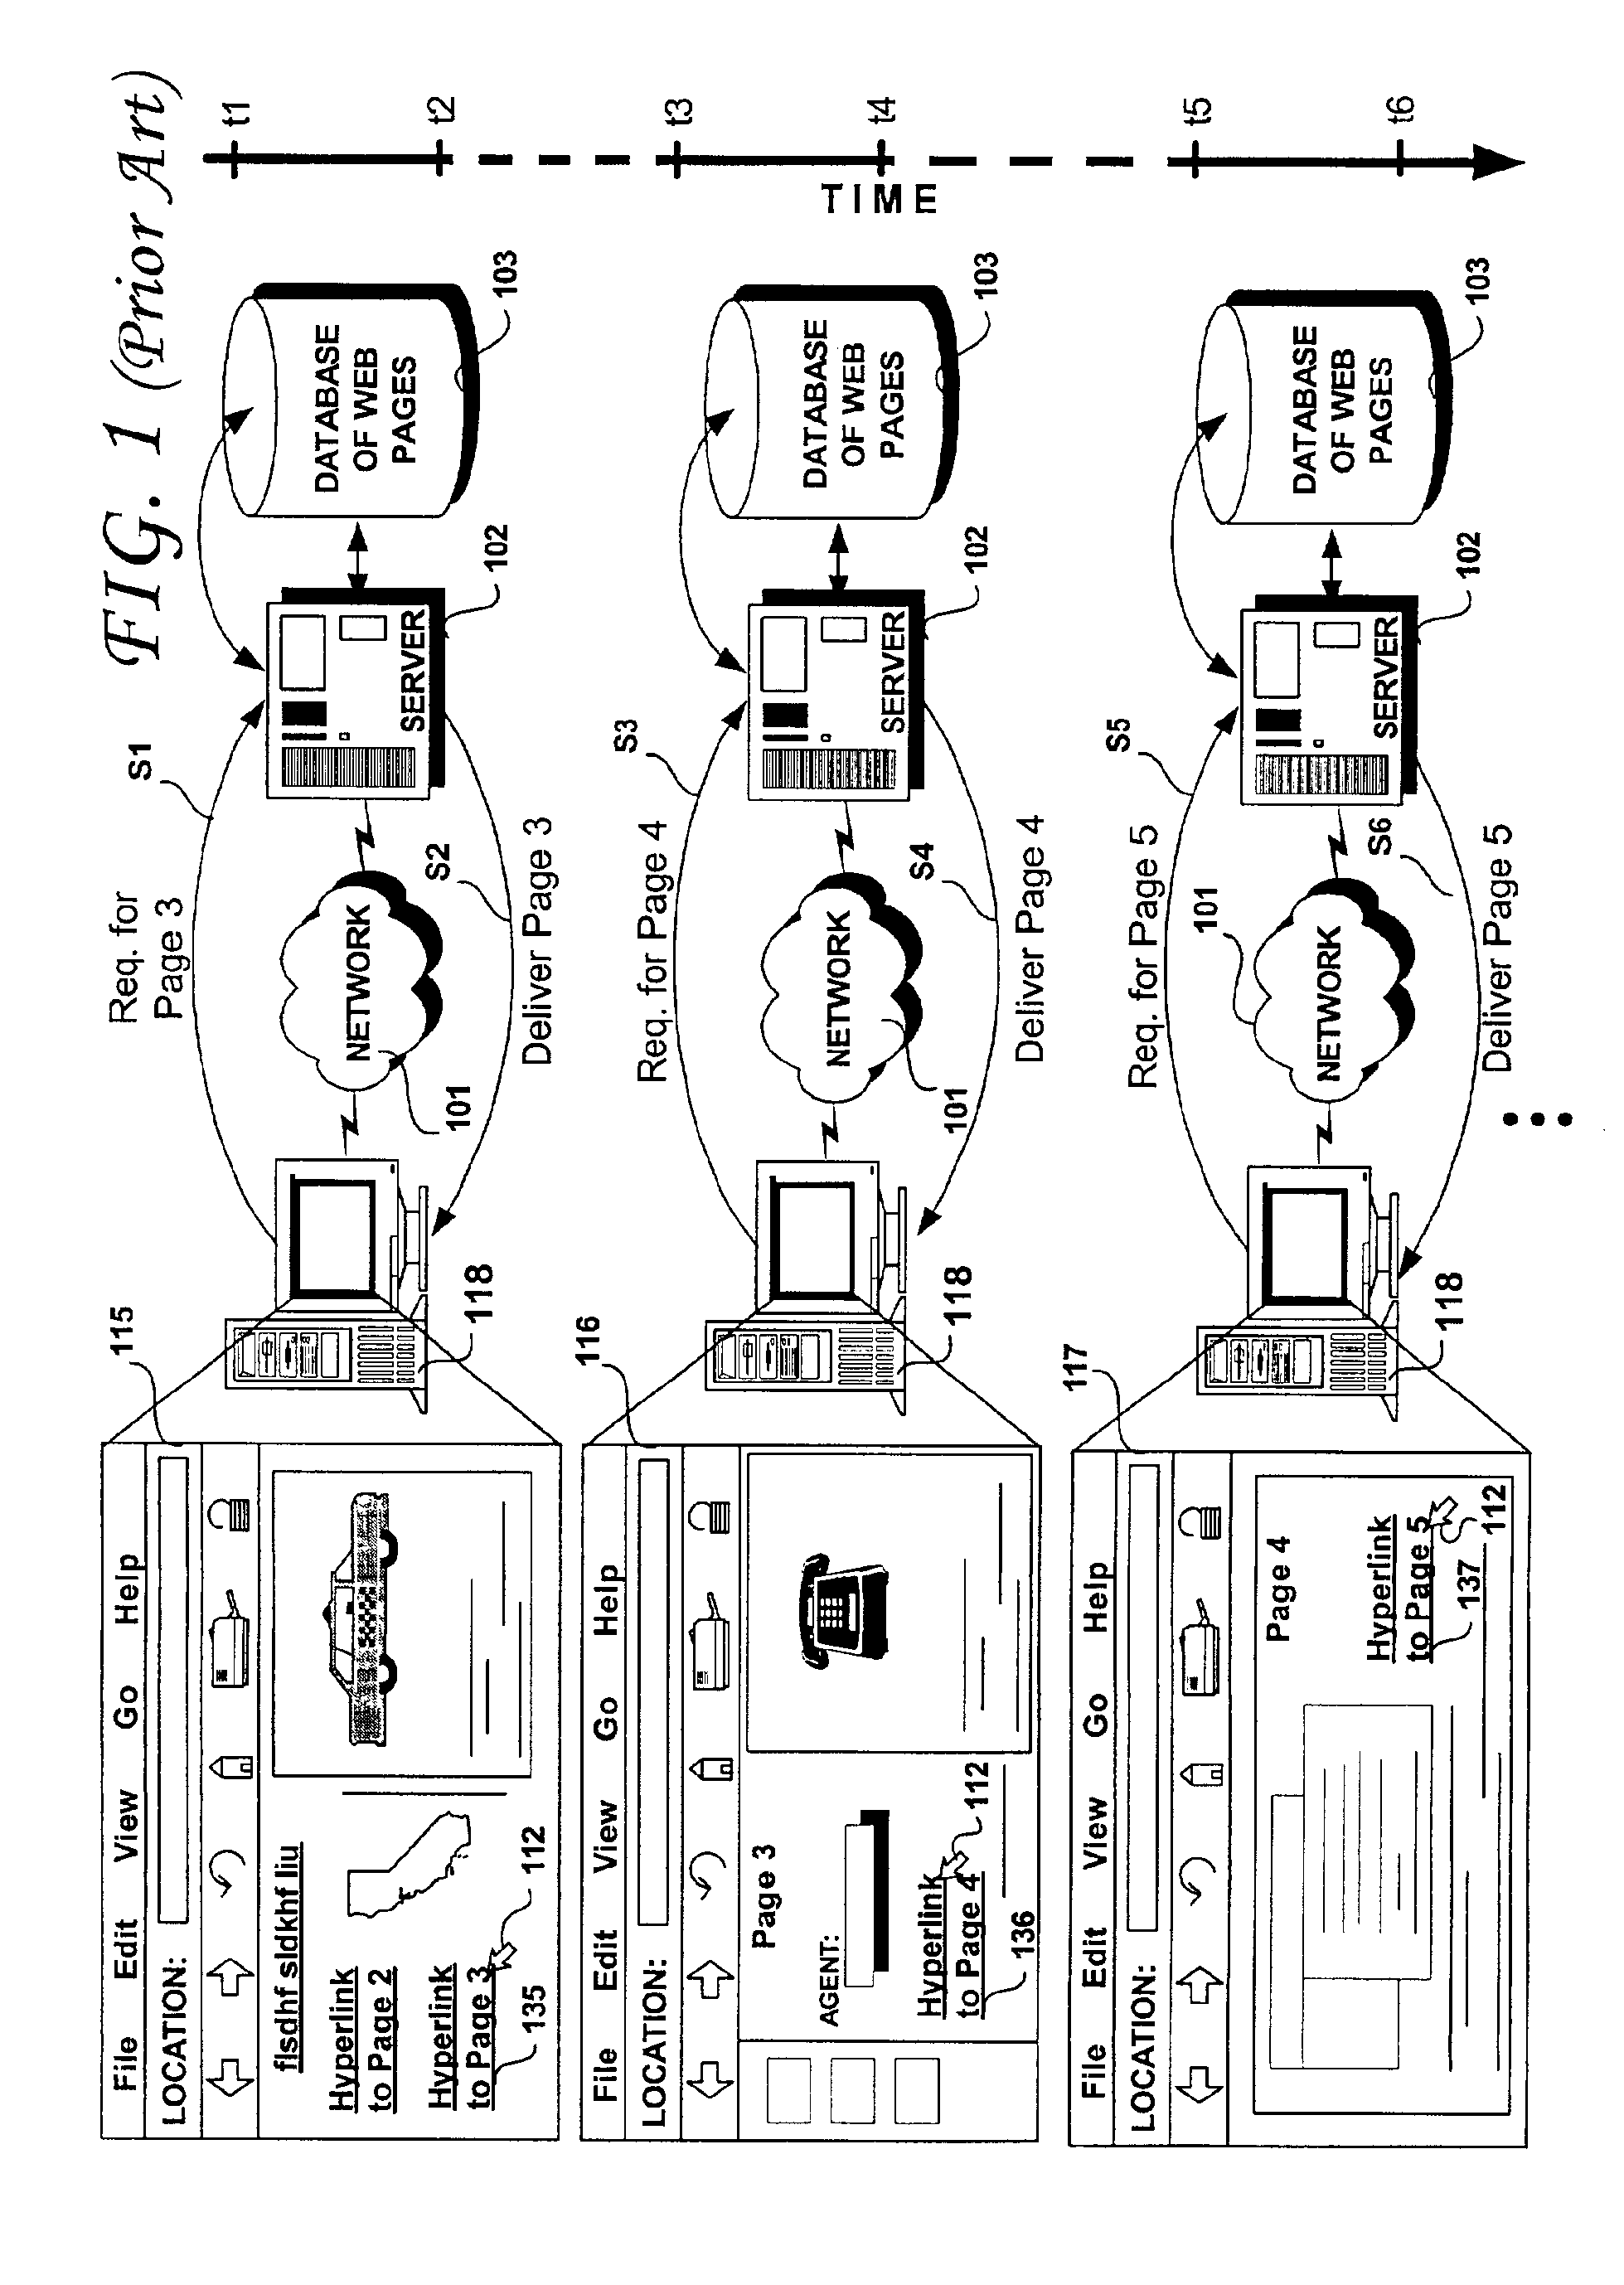 Methods and systems for preemptive and predictive page caching for improved site navigation